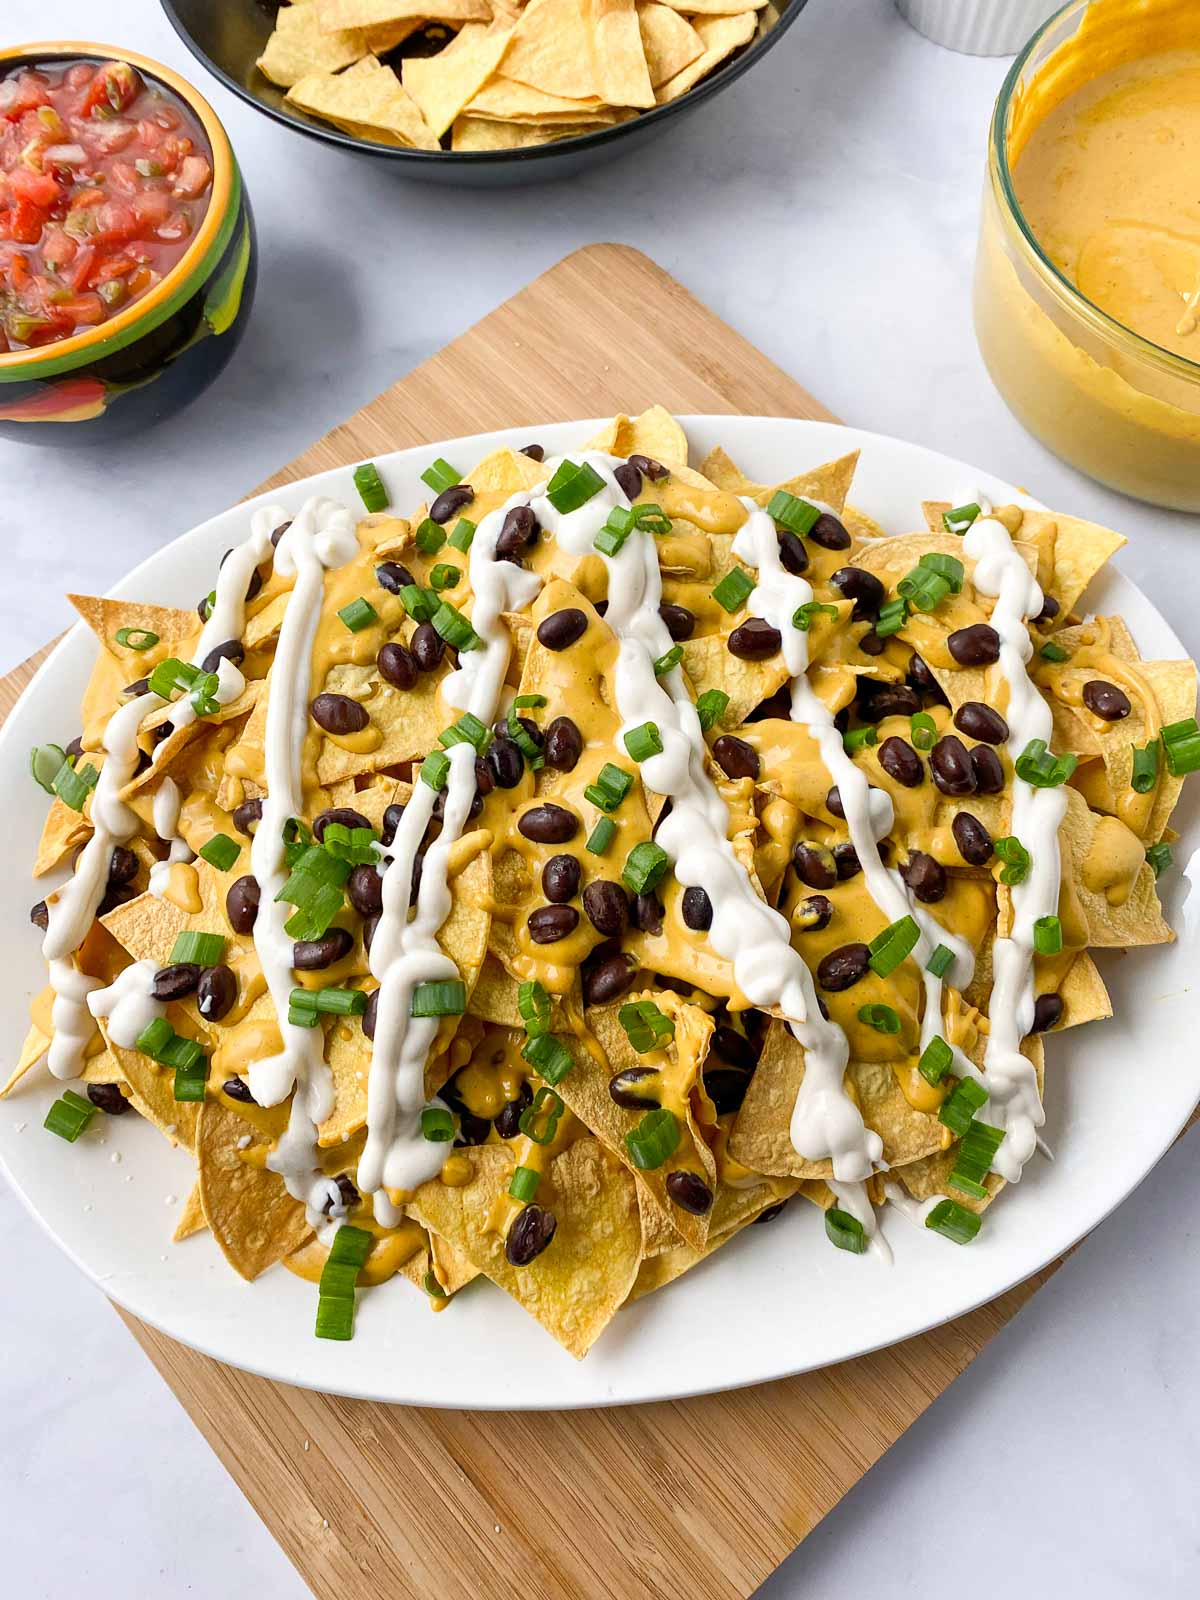 Sour cream and green onions added to platter of nachos.